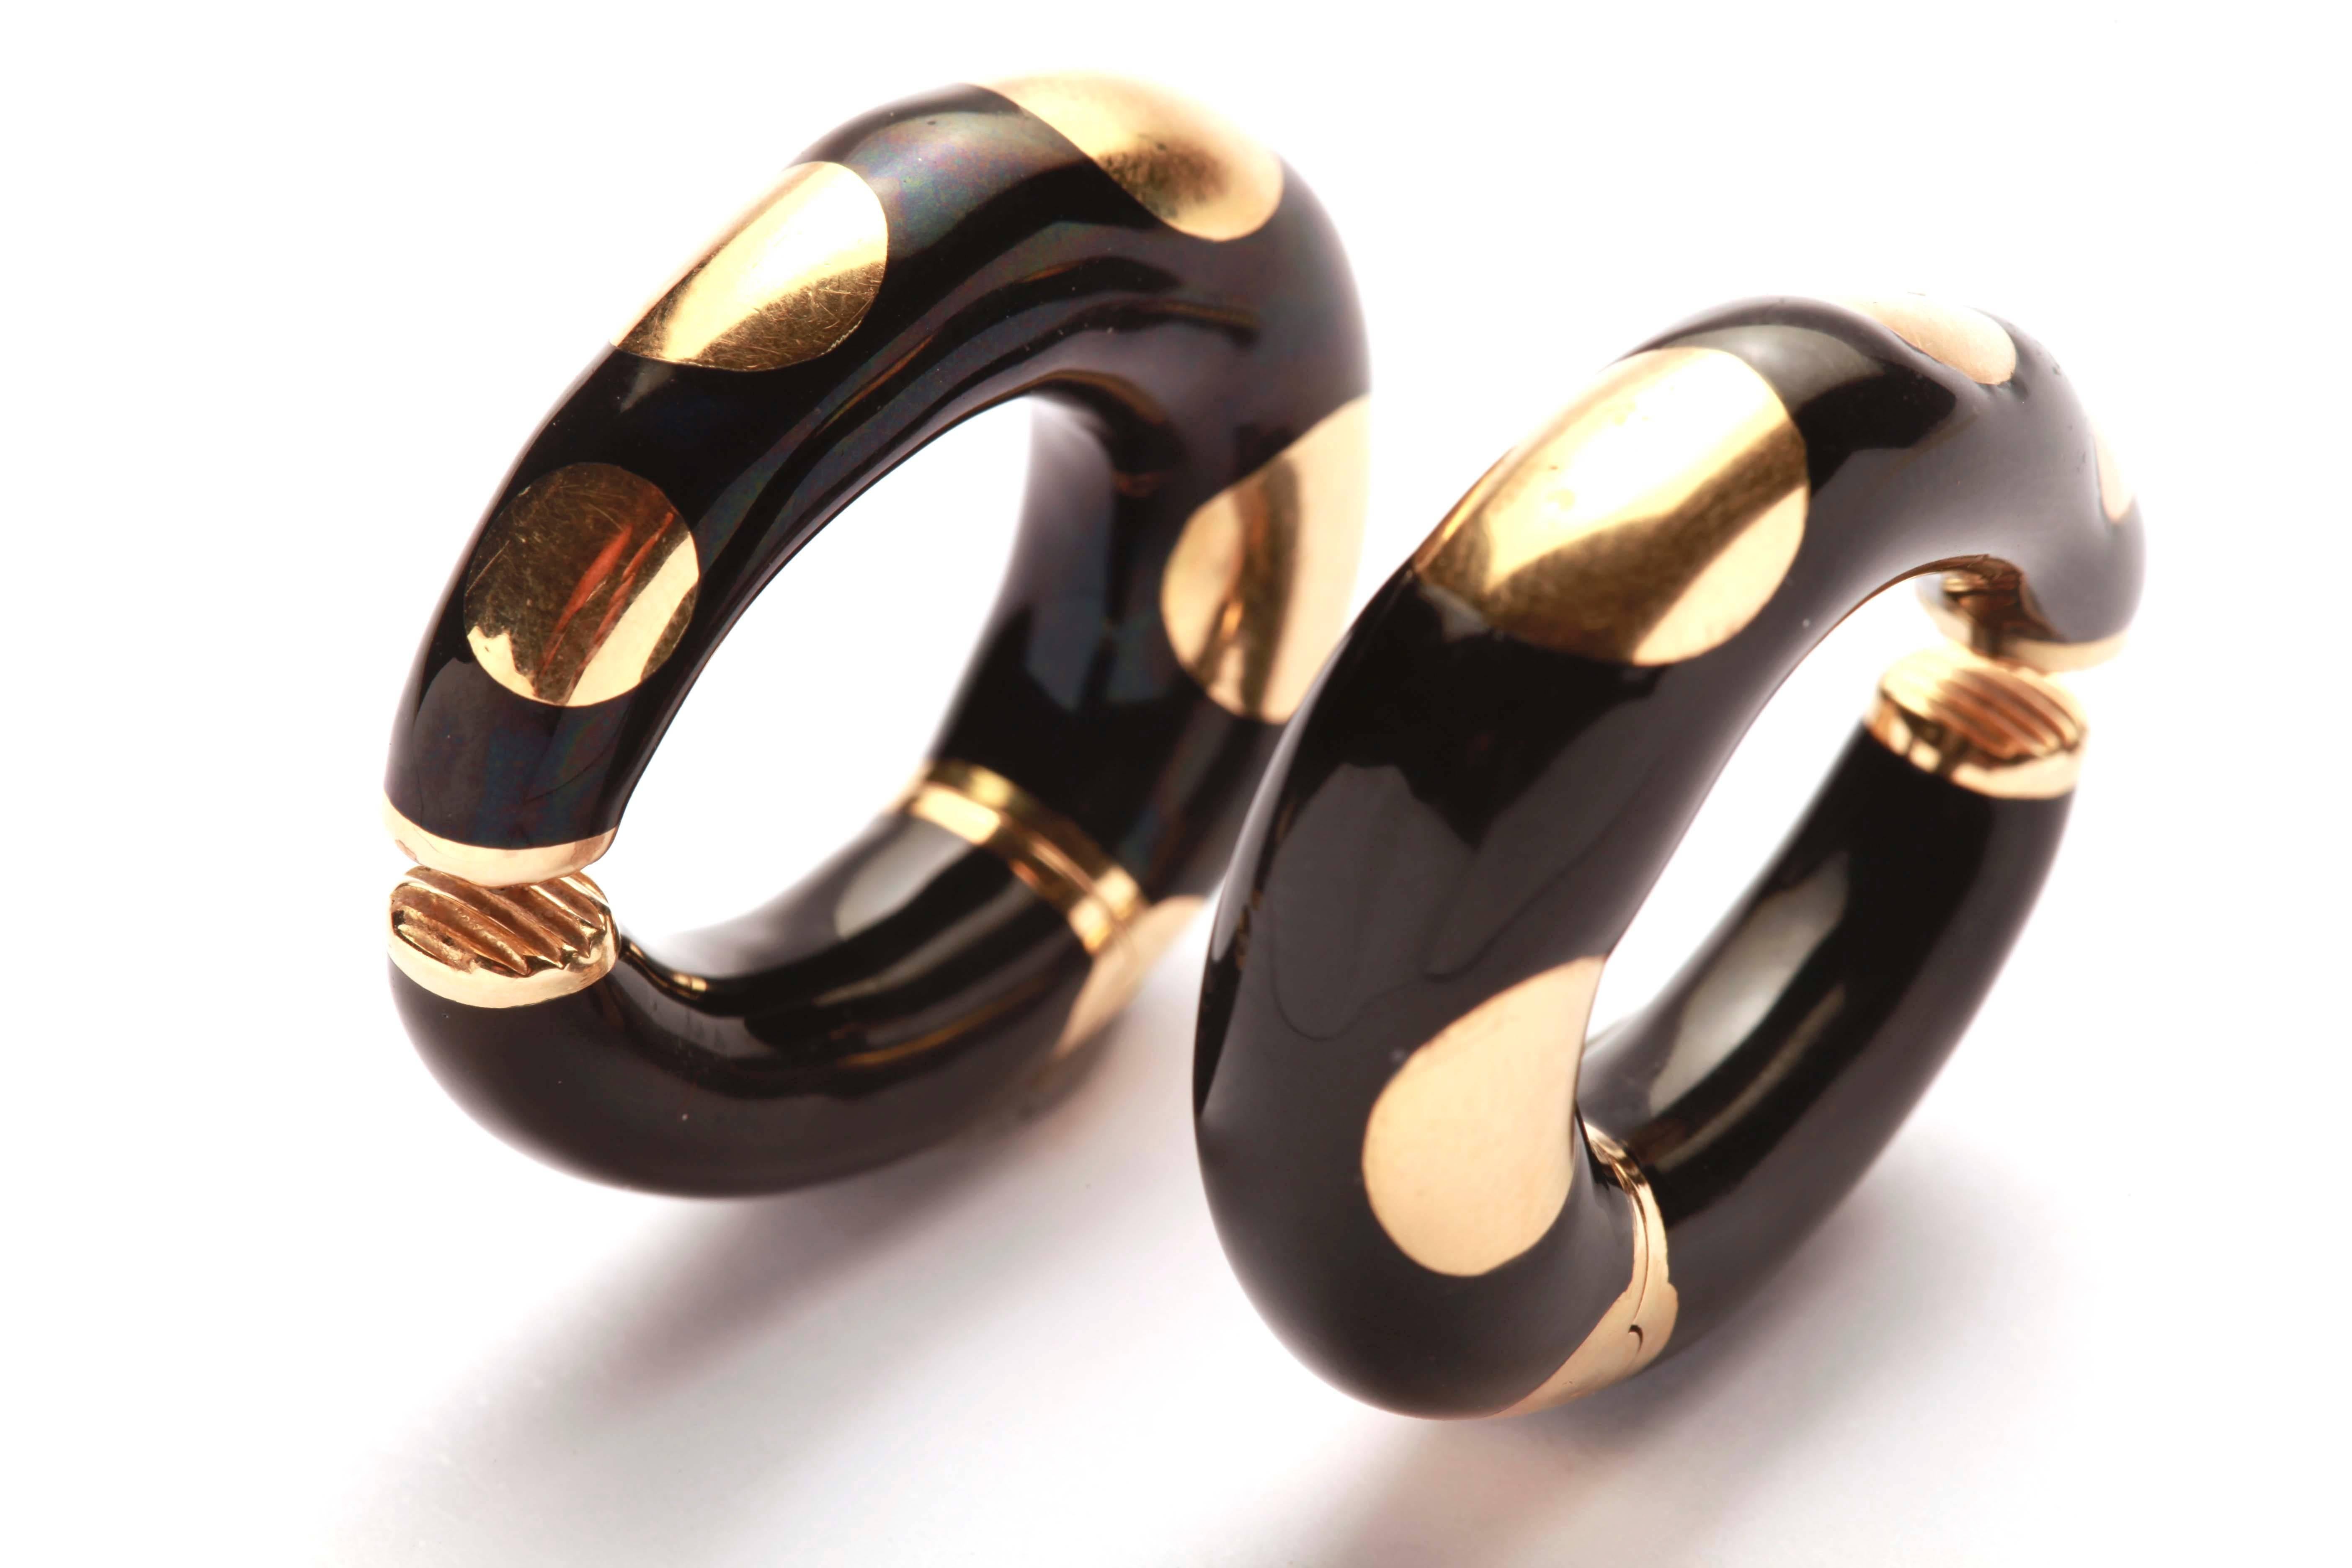 A pair of sophisticated 18kt yellow gold earrings, decorated with black enamel. By Bulgari, circa 1975.

